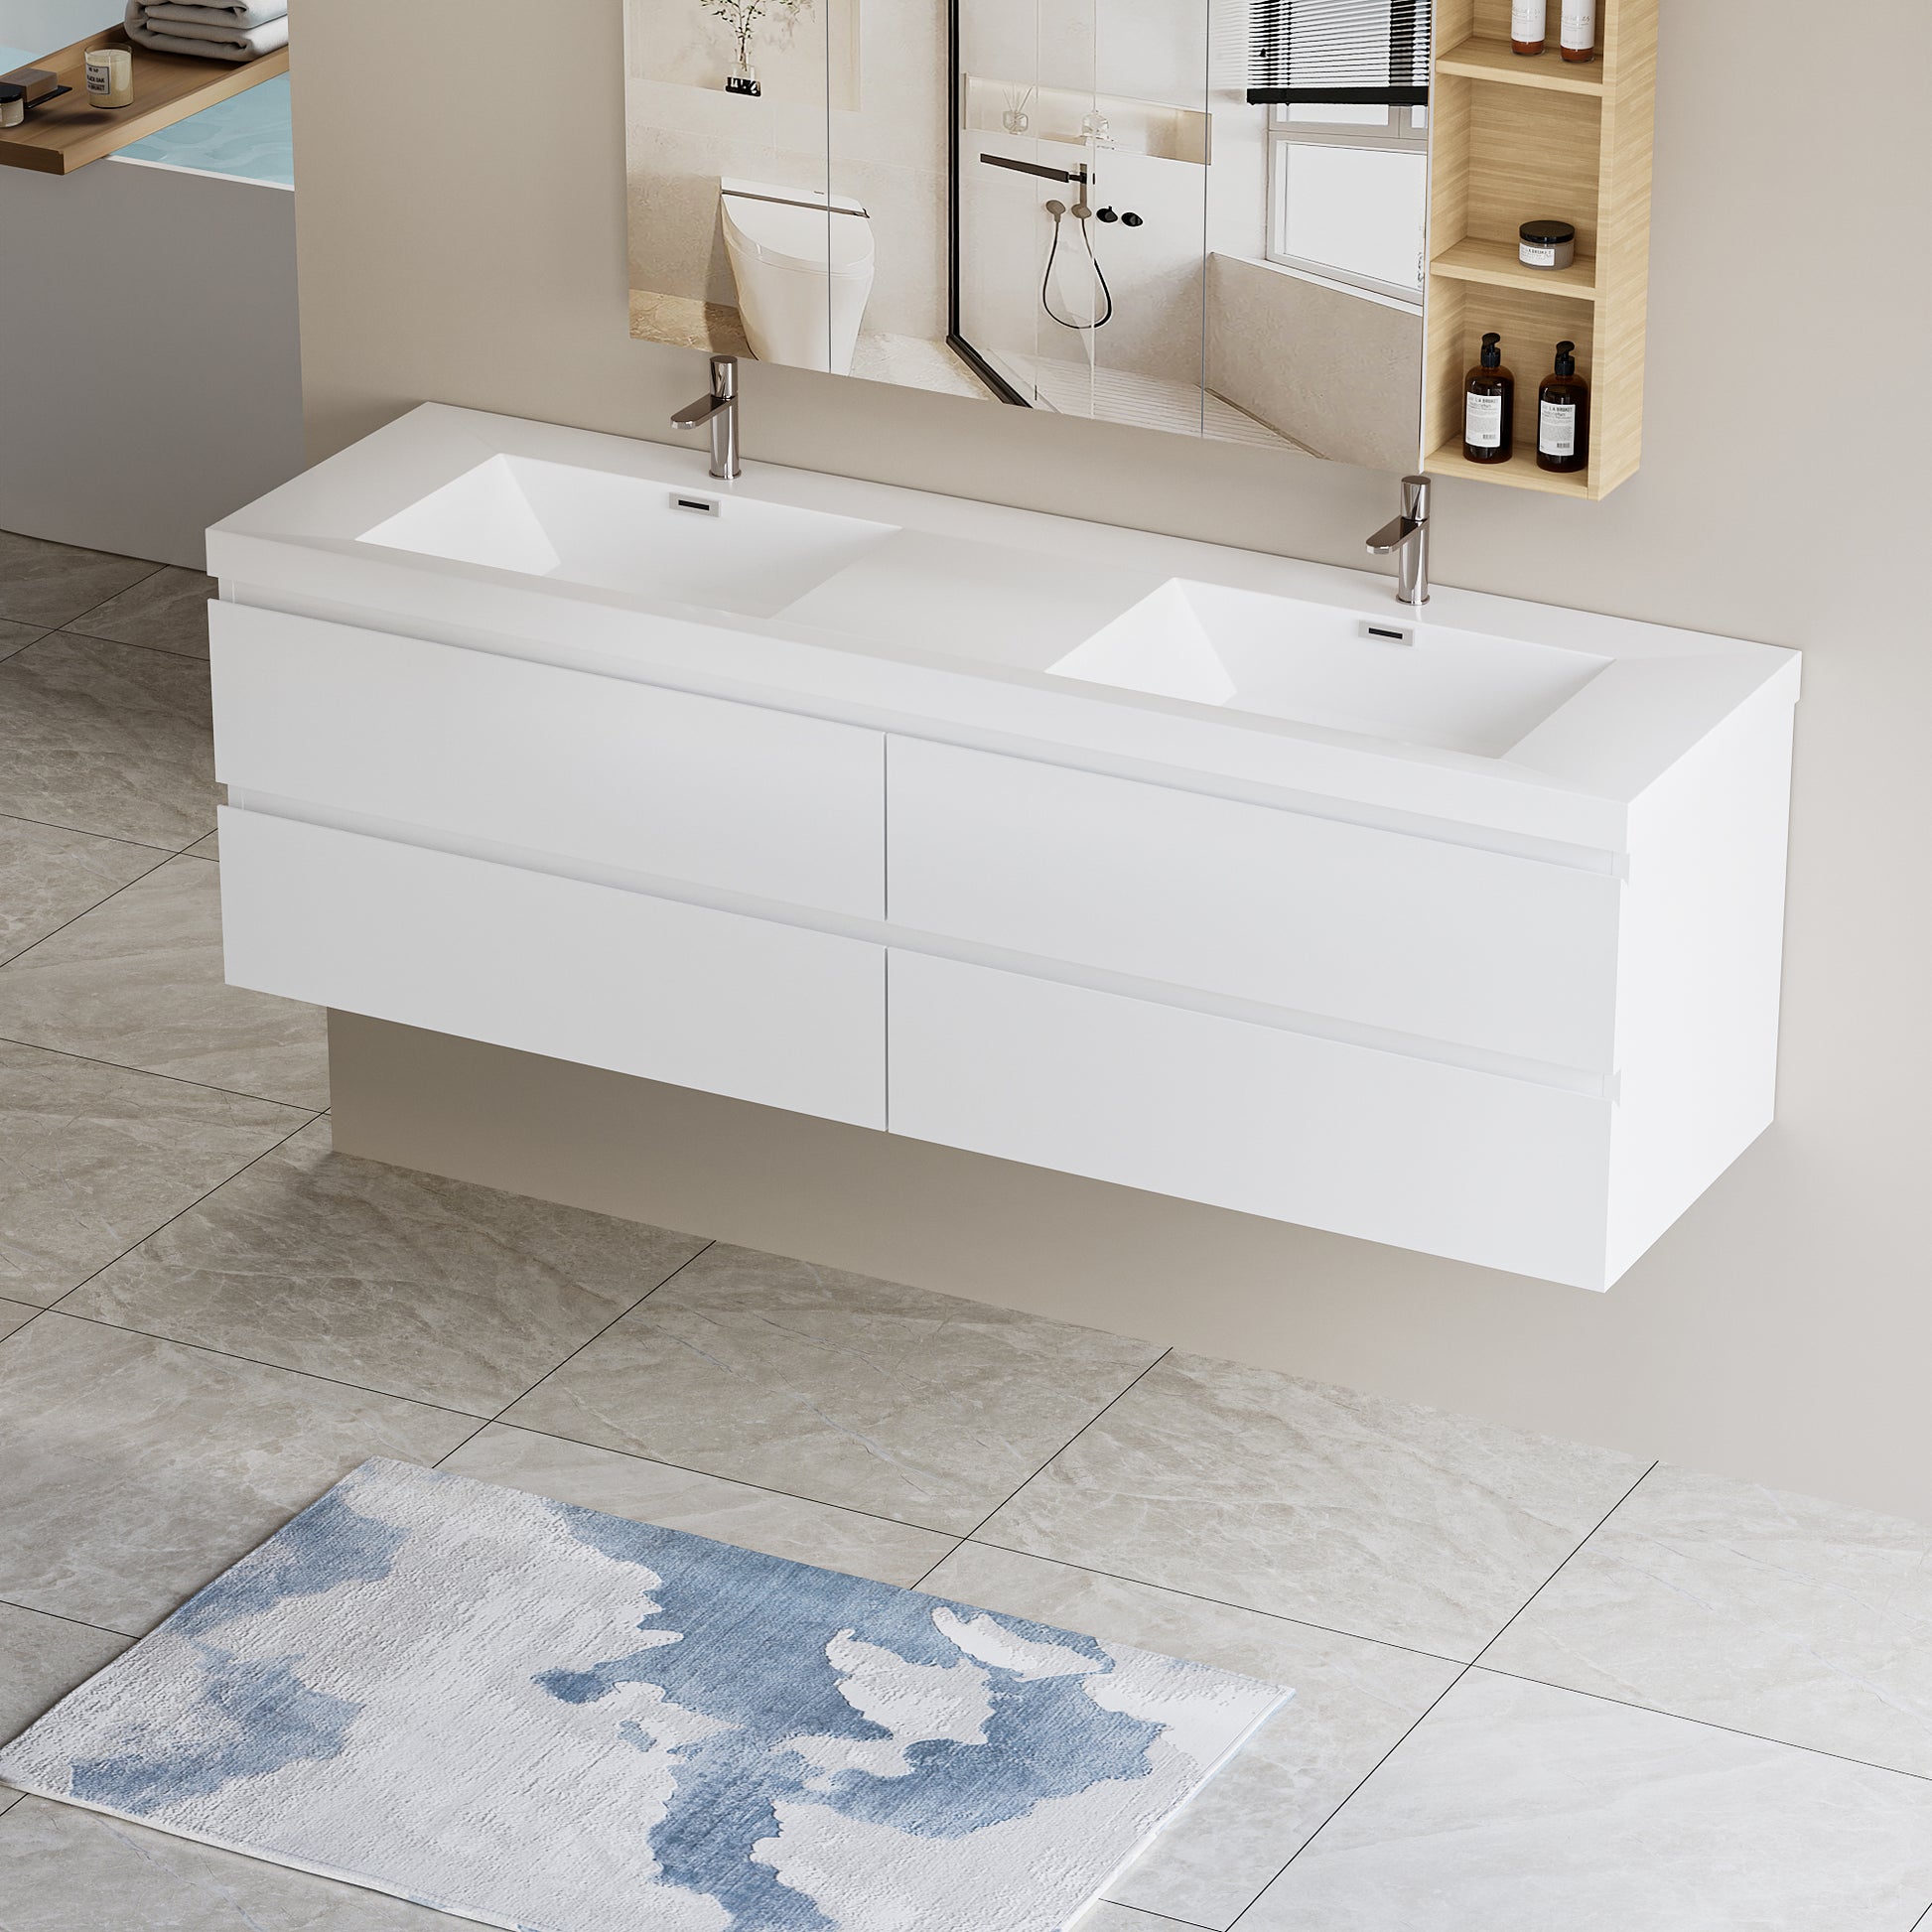 72" Floating Bathroom Vanity with Sink, Modern Wall 4+-white-wall mounted-mdf